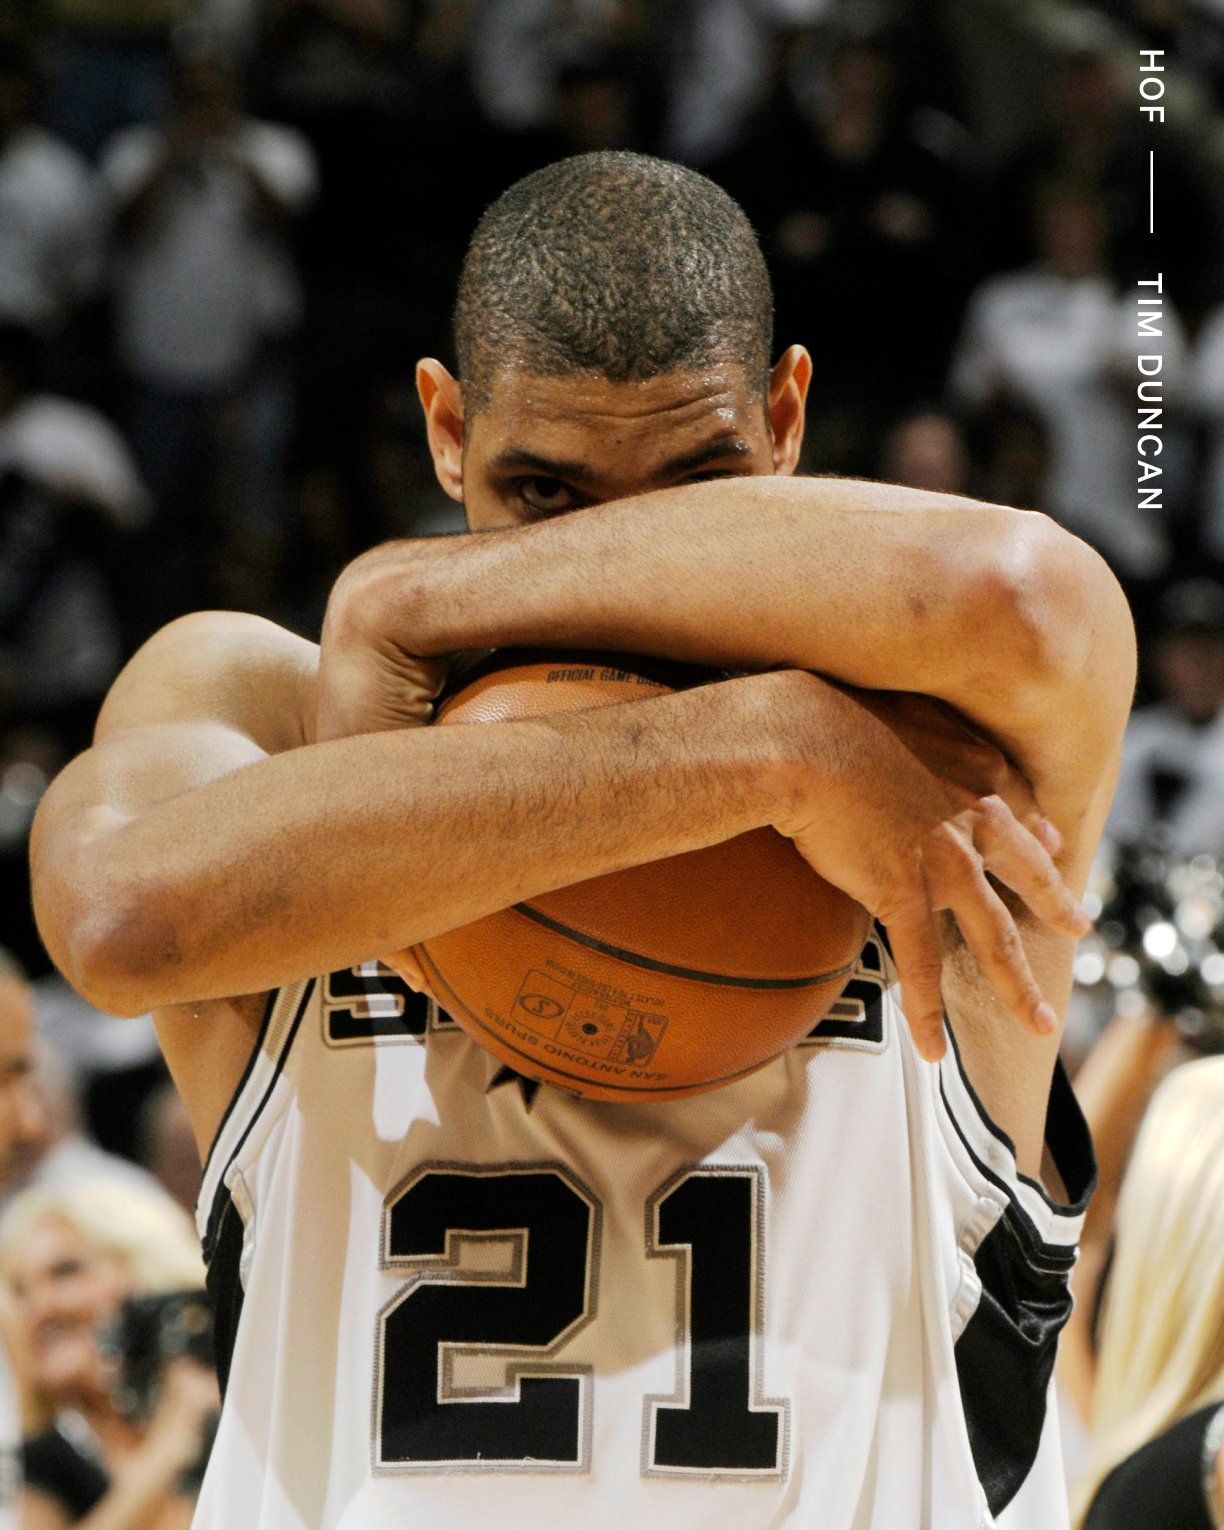 The Athletic on "The Big Fundamental has finally arrived 👏 Tim Duncan is officially a Hall of Famer. https://t.co/Dir0bbEAeV" / Twitter